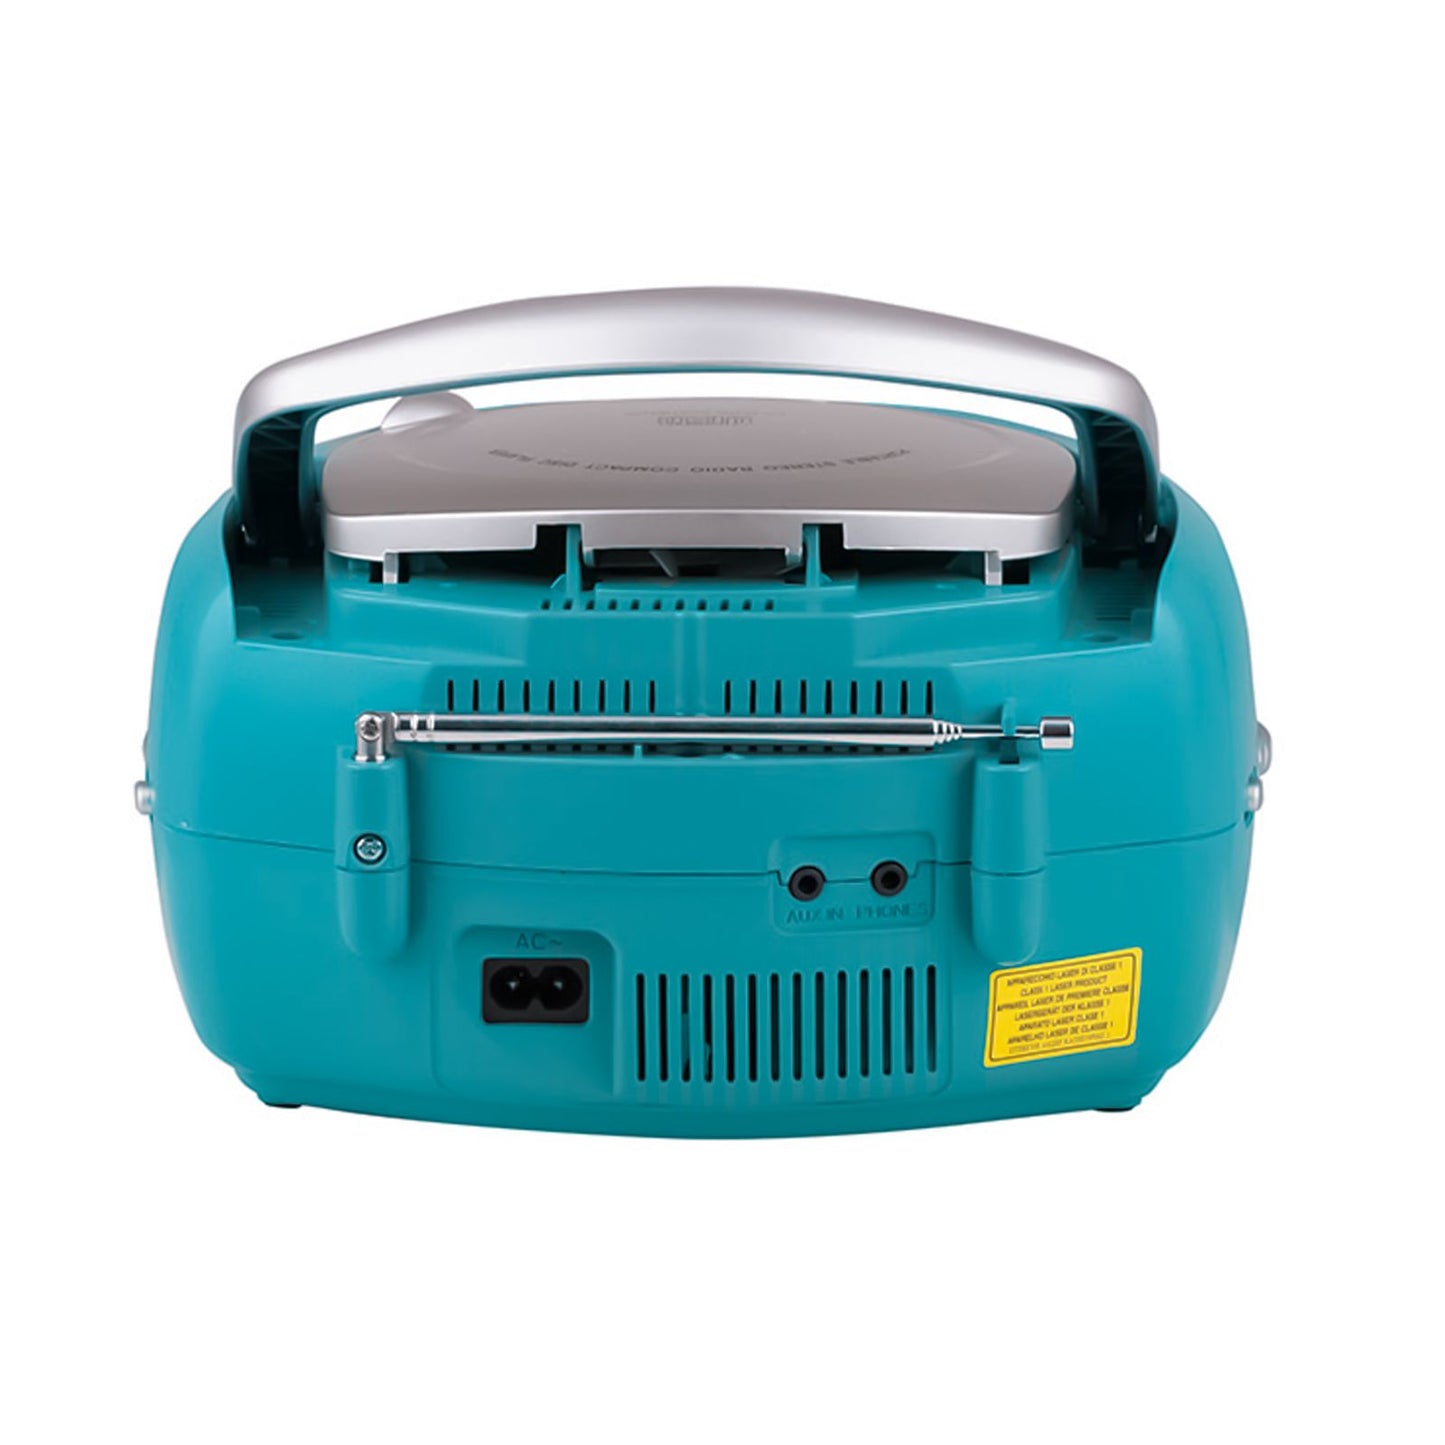 Trevi boombox portable stereo with CD player and aux input, FM radio, turquoise colour